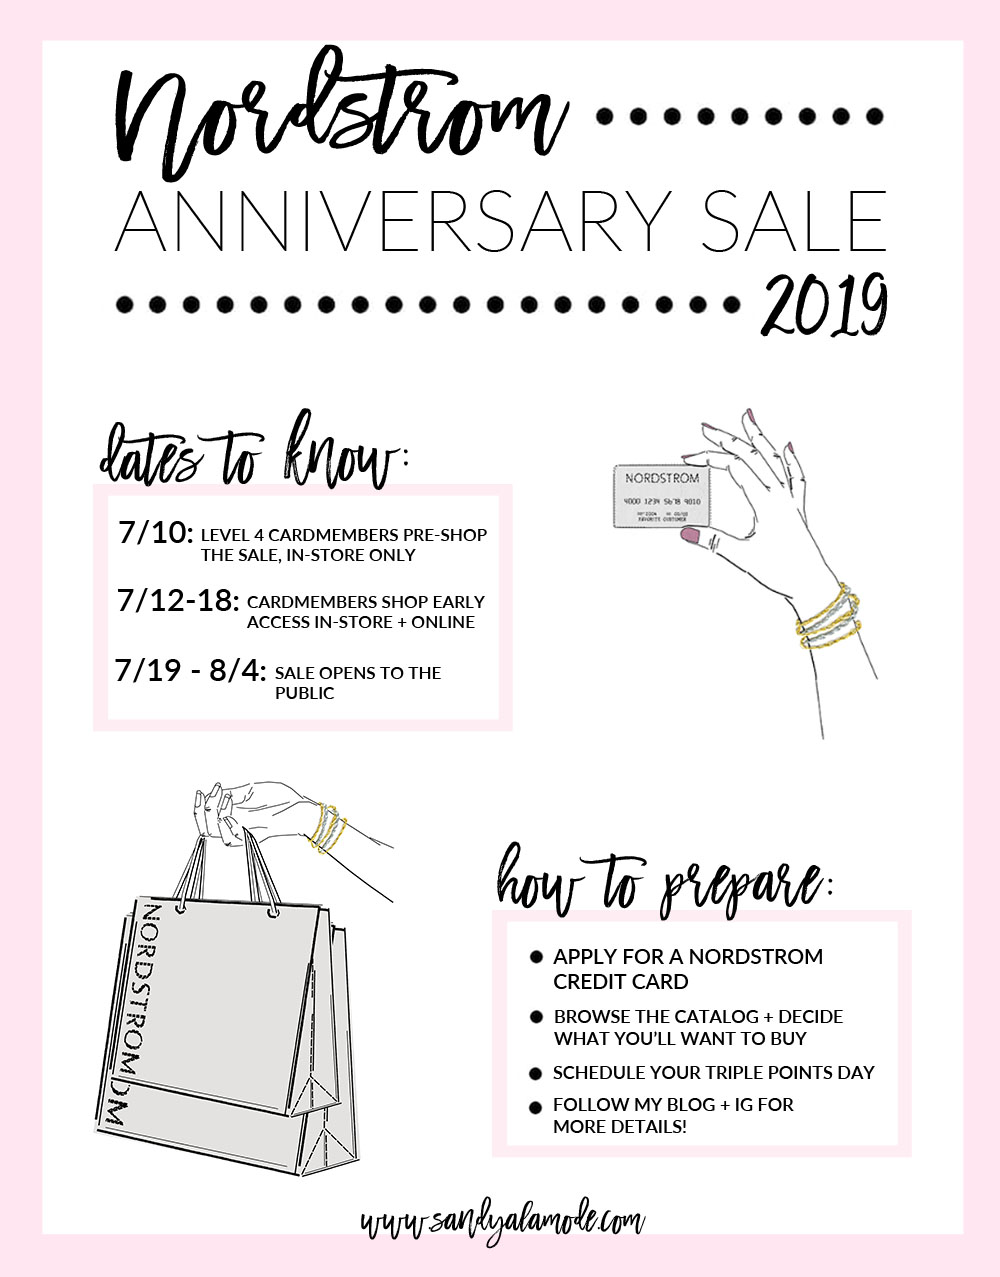 Nordstrom Anniversary Sale 2019 - Everything You Need To Know | SandyALaMode